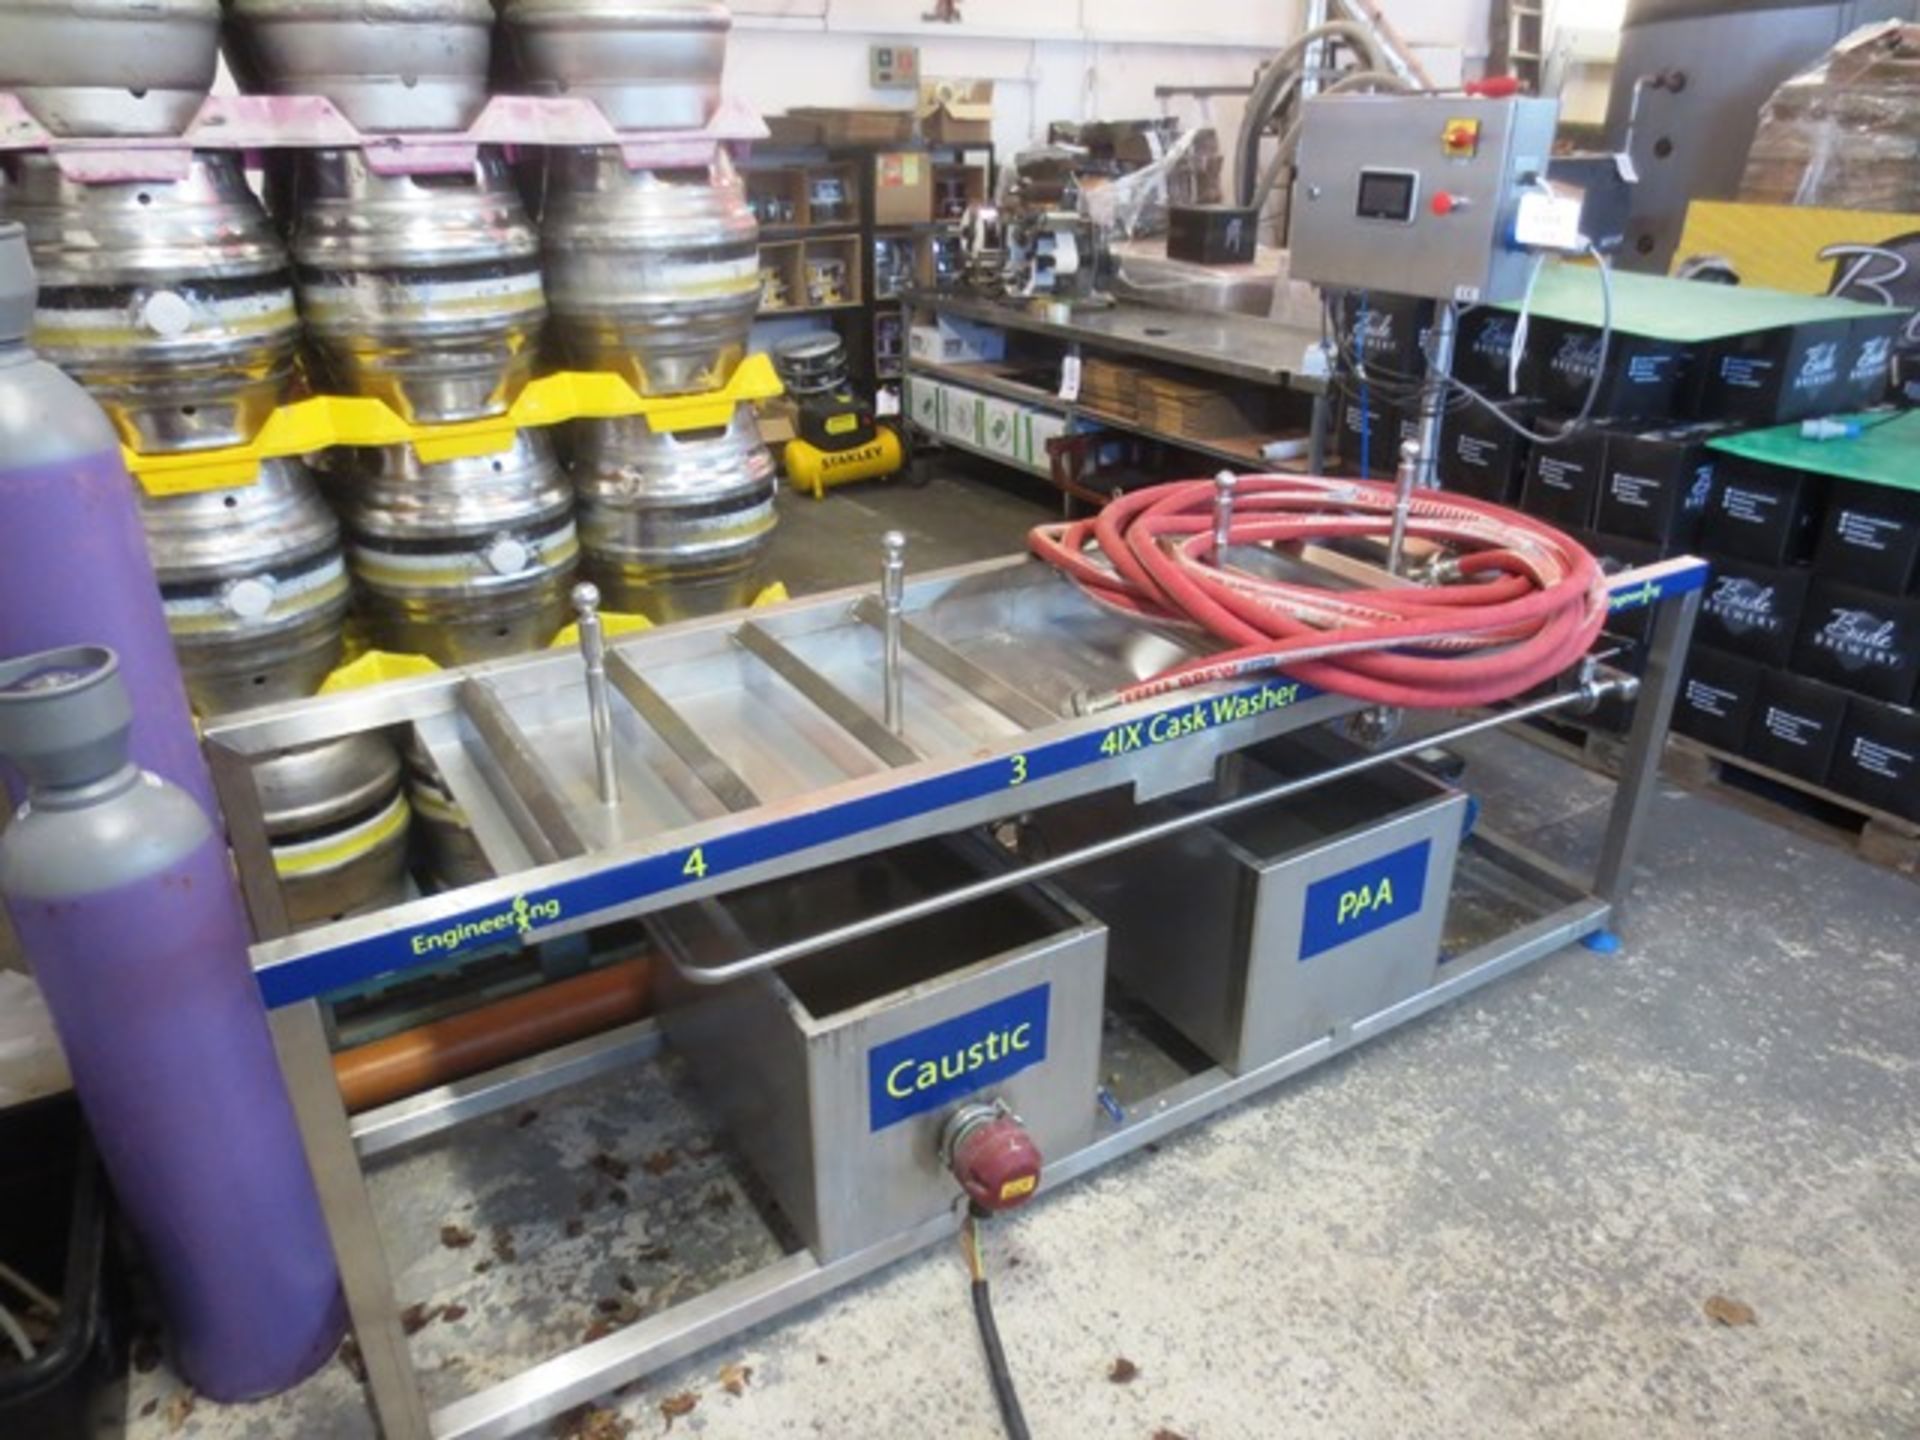 6ixen stainless steel 41X cask washer with control, drain table, caustic / PAPI tank, 5 motorised